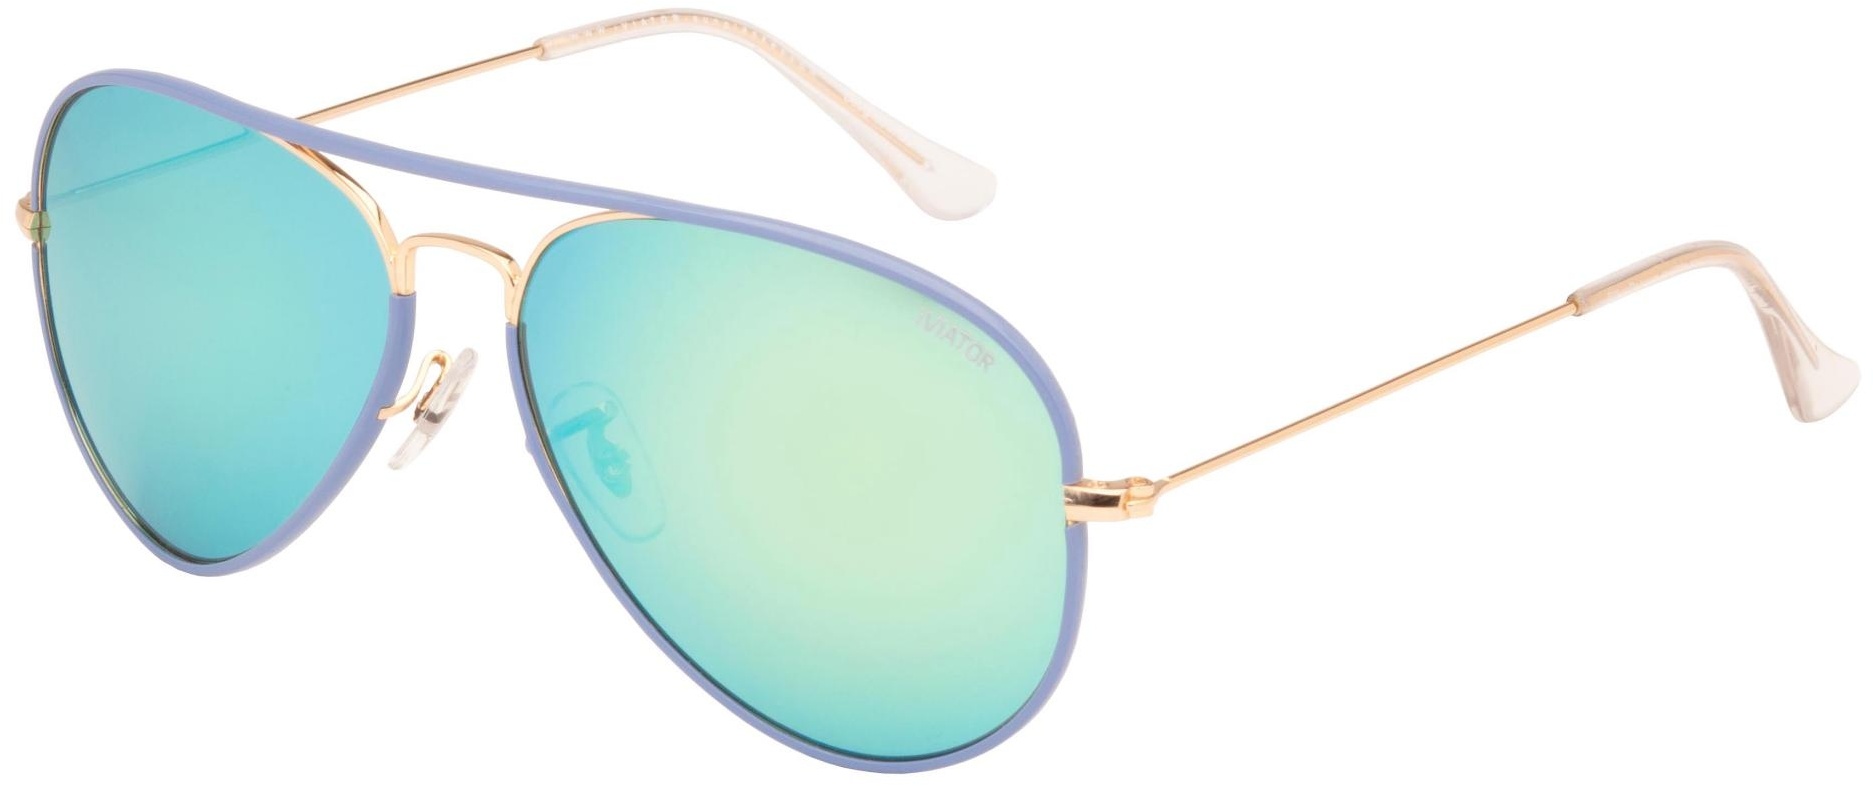 iVIATOR Sunglasses Limited-144 Green Revo Limited-Blue Leather - Unisex